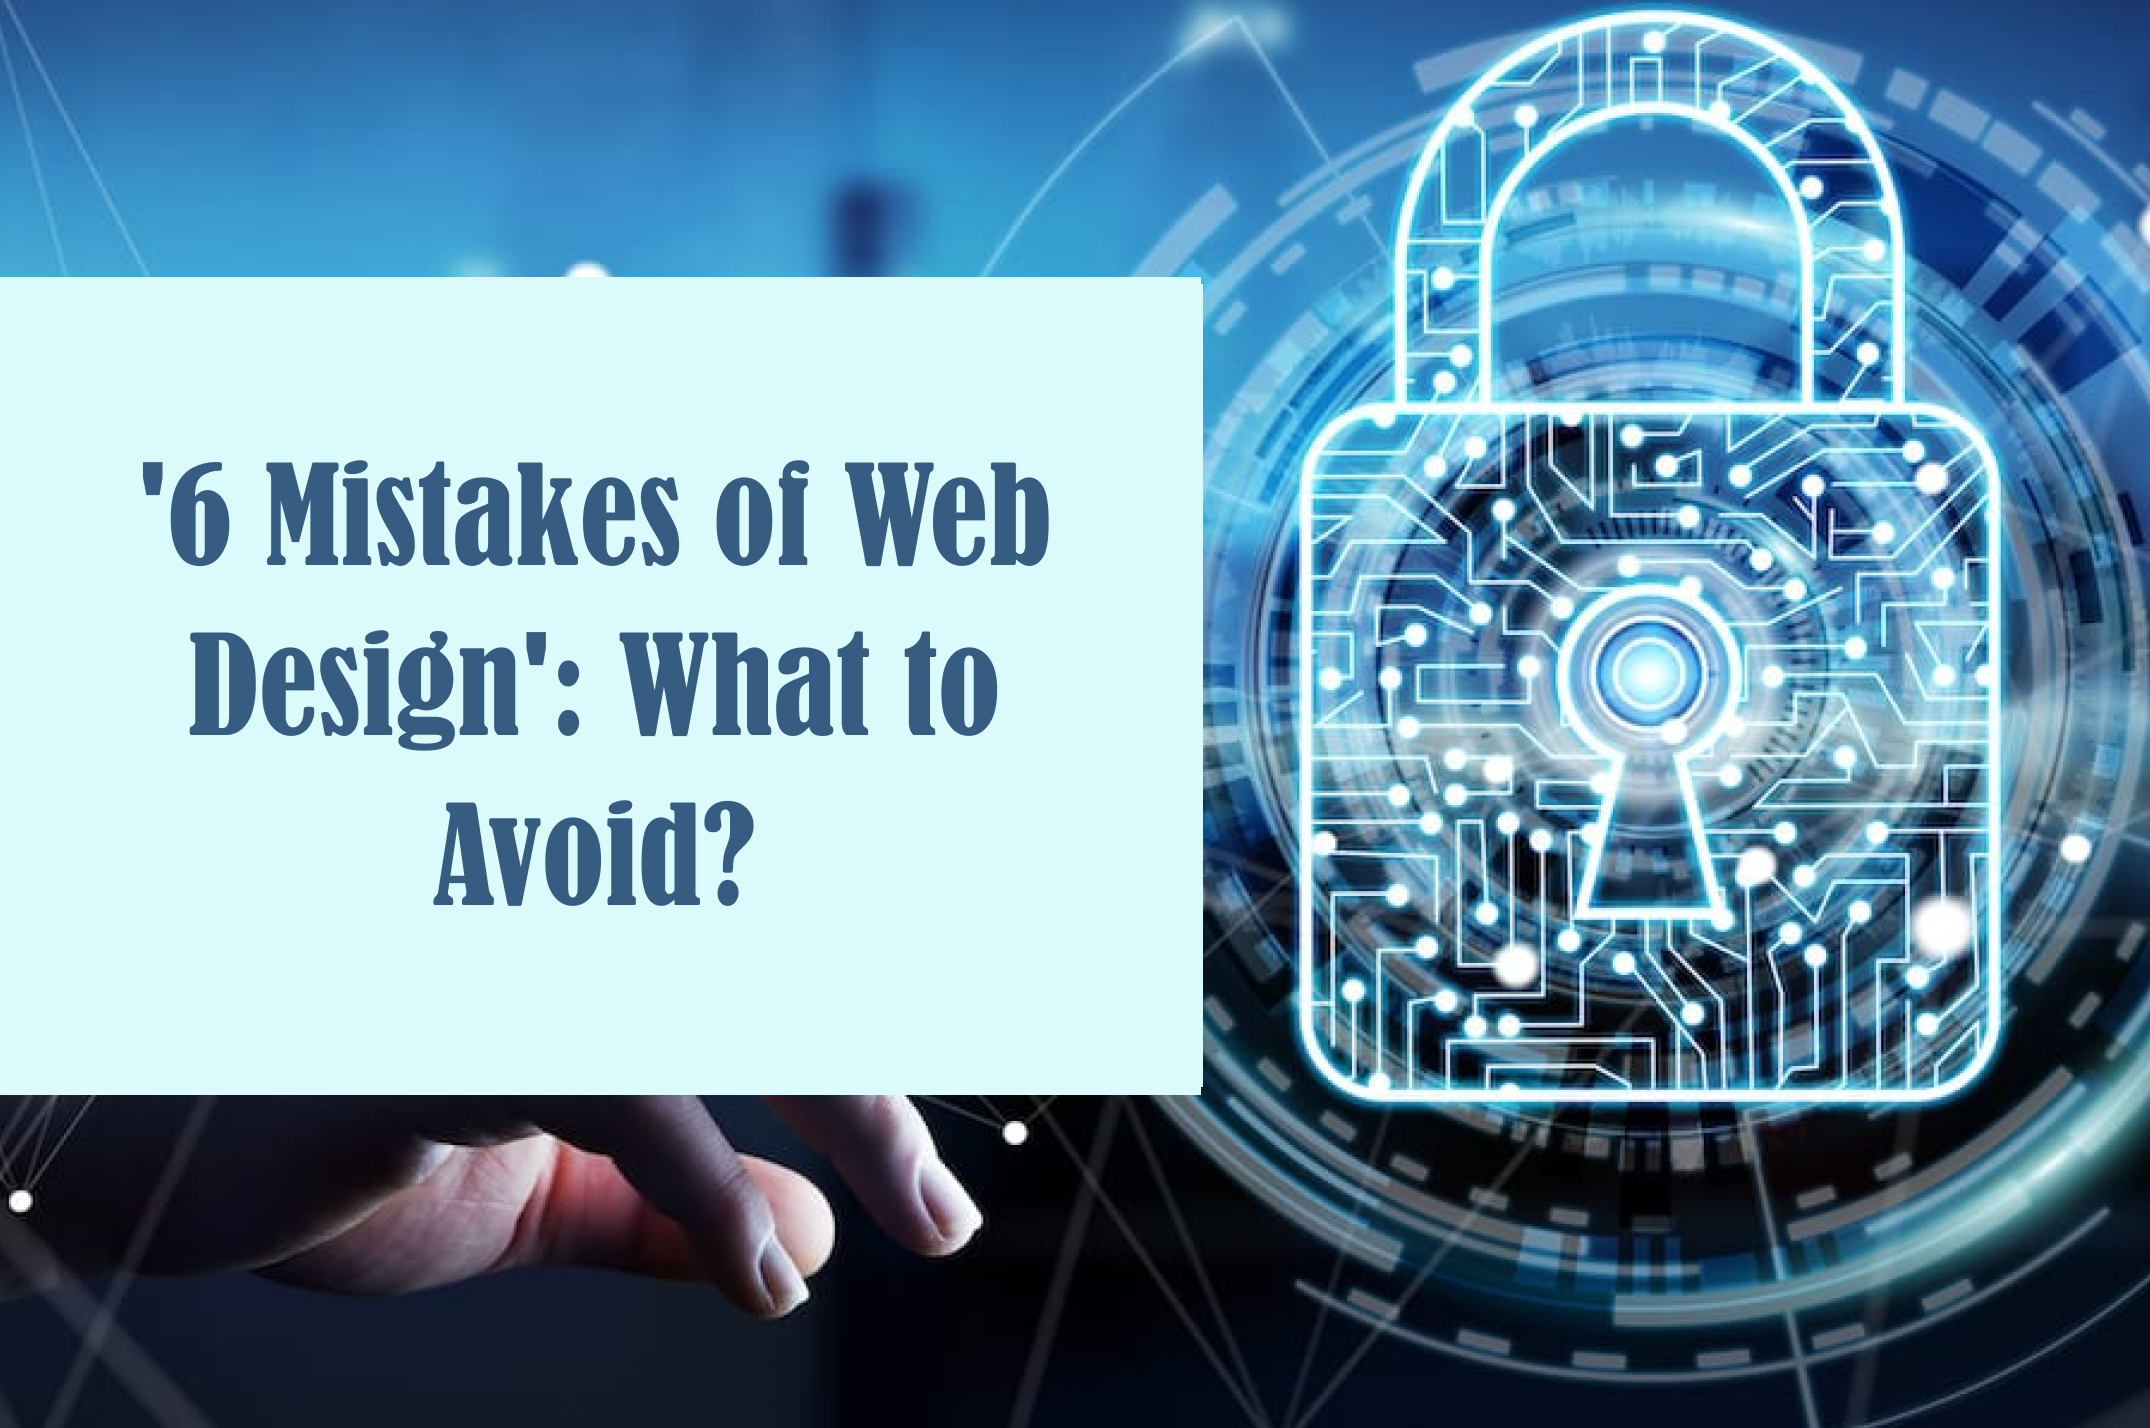 ‘6 Mistakes of Web Design’: What to Avoid?